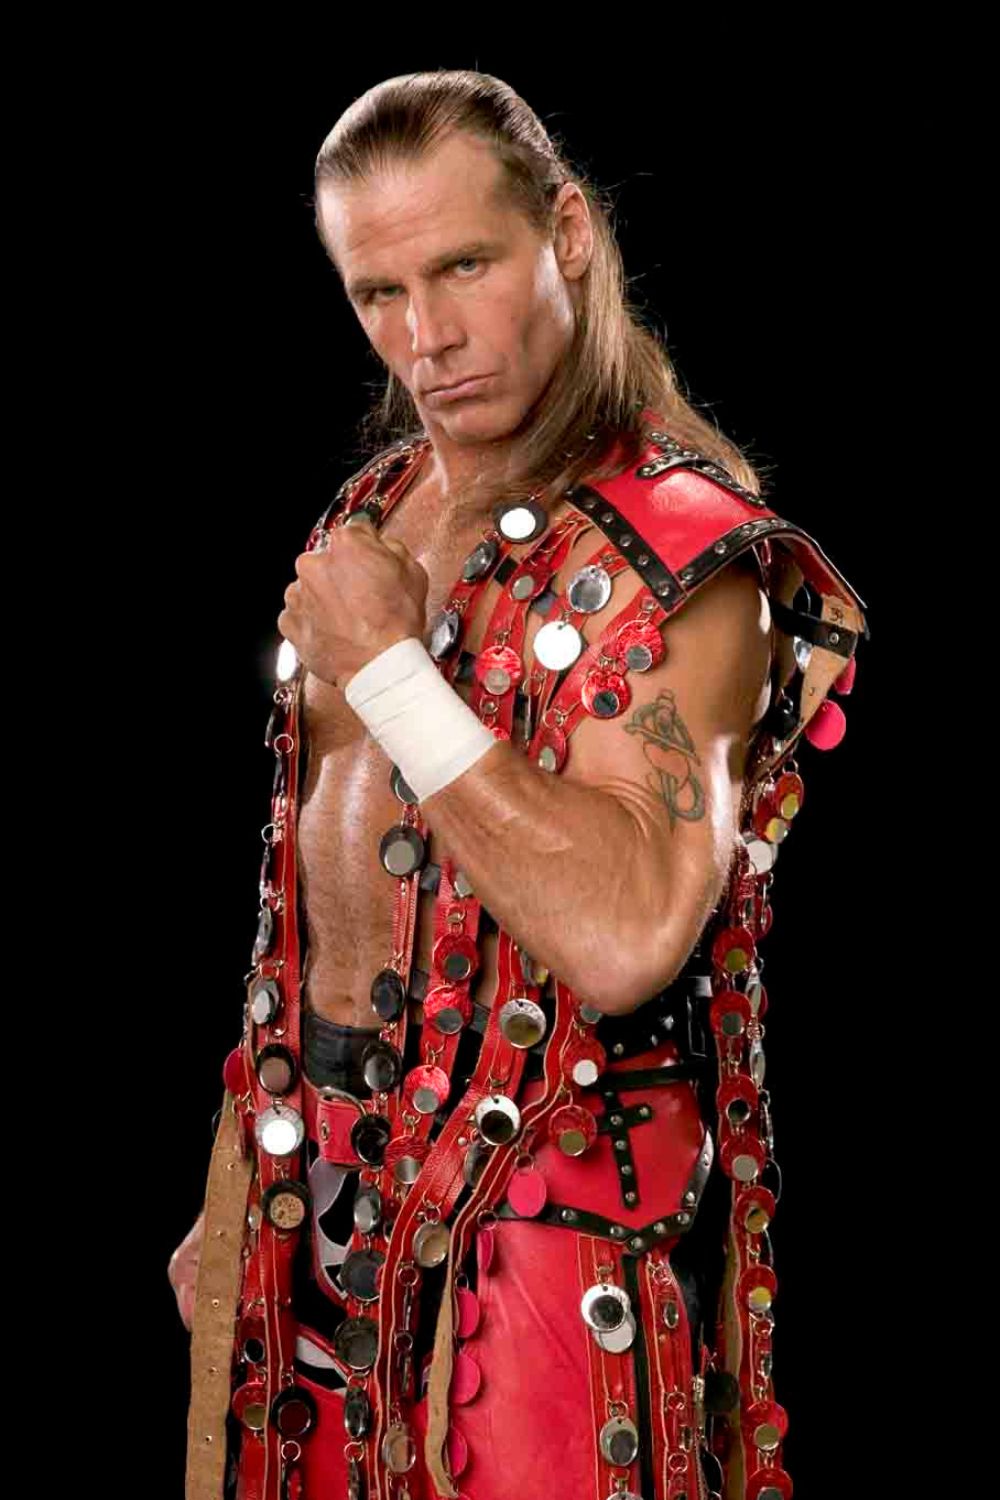 Shawn Michaels Posing In The Costume 